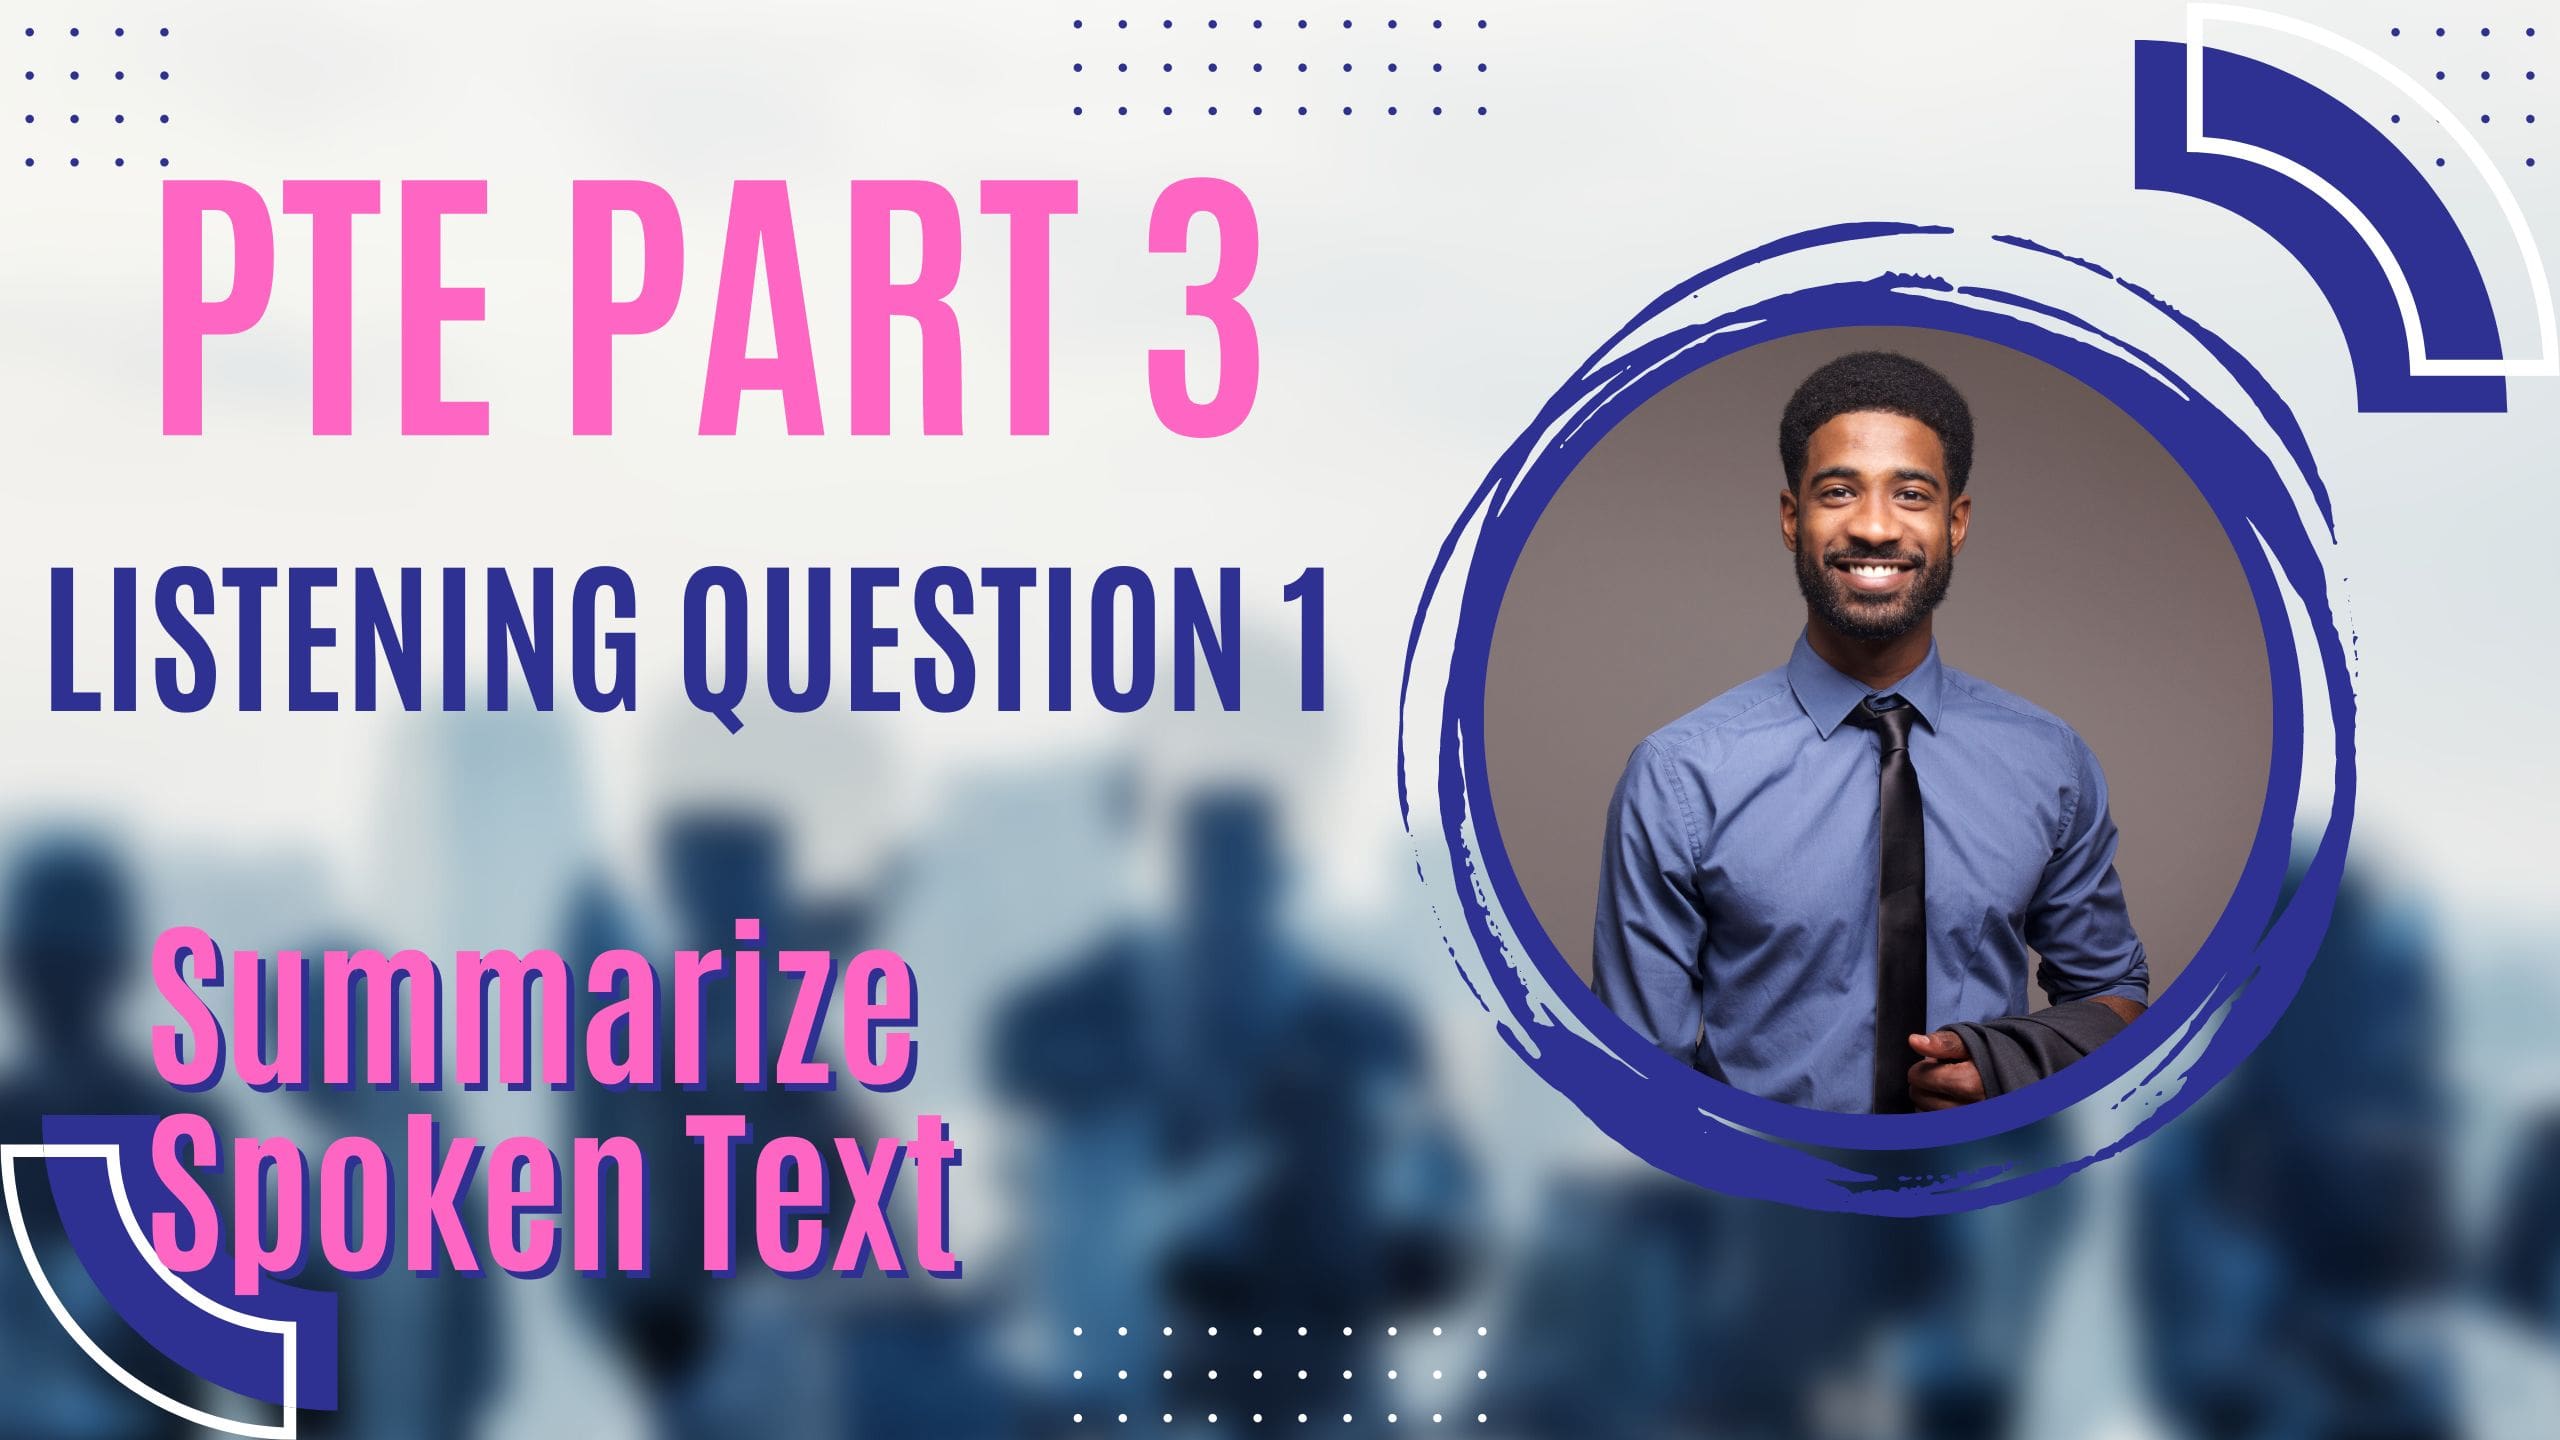 PTE Part 3: Listening Question 1 -Summarize Spoken Text:Part 3 of the PTE Listening section is a crucial component of the test and requires careful preparation and practice. By understanding the different question types and practising your listening and note-taking skills, you can increase your chances of performing well on this part of the test and achieving your desired score overall.